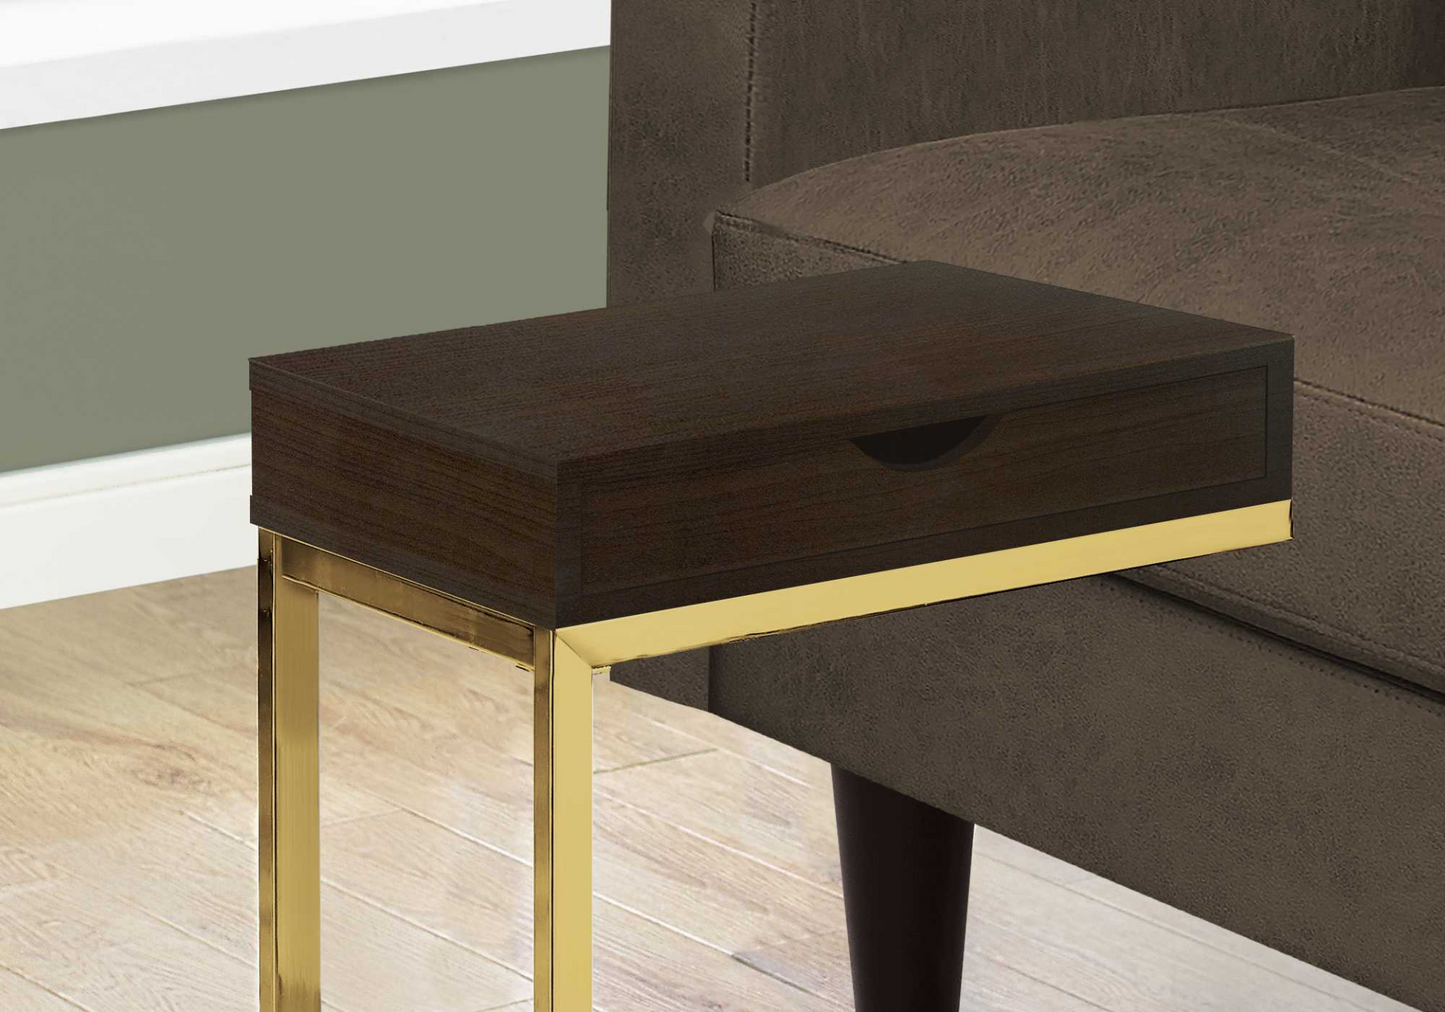 10.25" X 15.75" X 24.5" Cappuccino Finish And Gold Laminated Drawer Accent Table